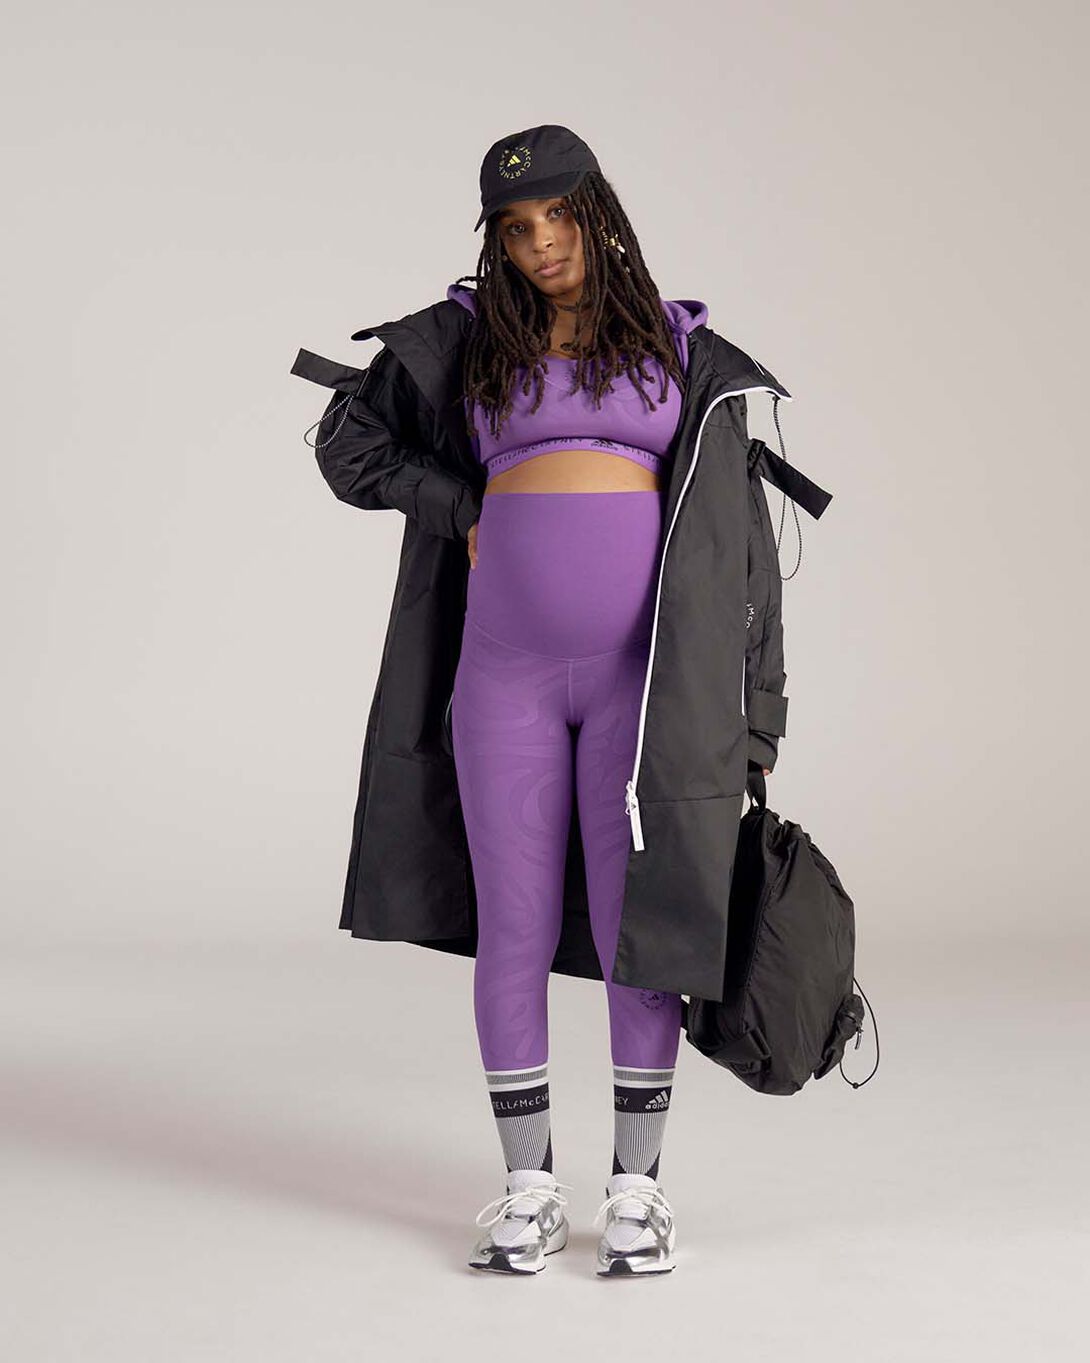 Introducing the first adidas by Stella McCartney Maternity collection